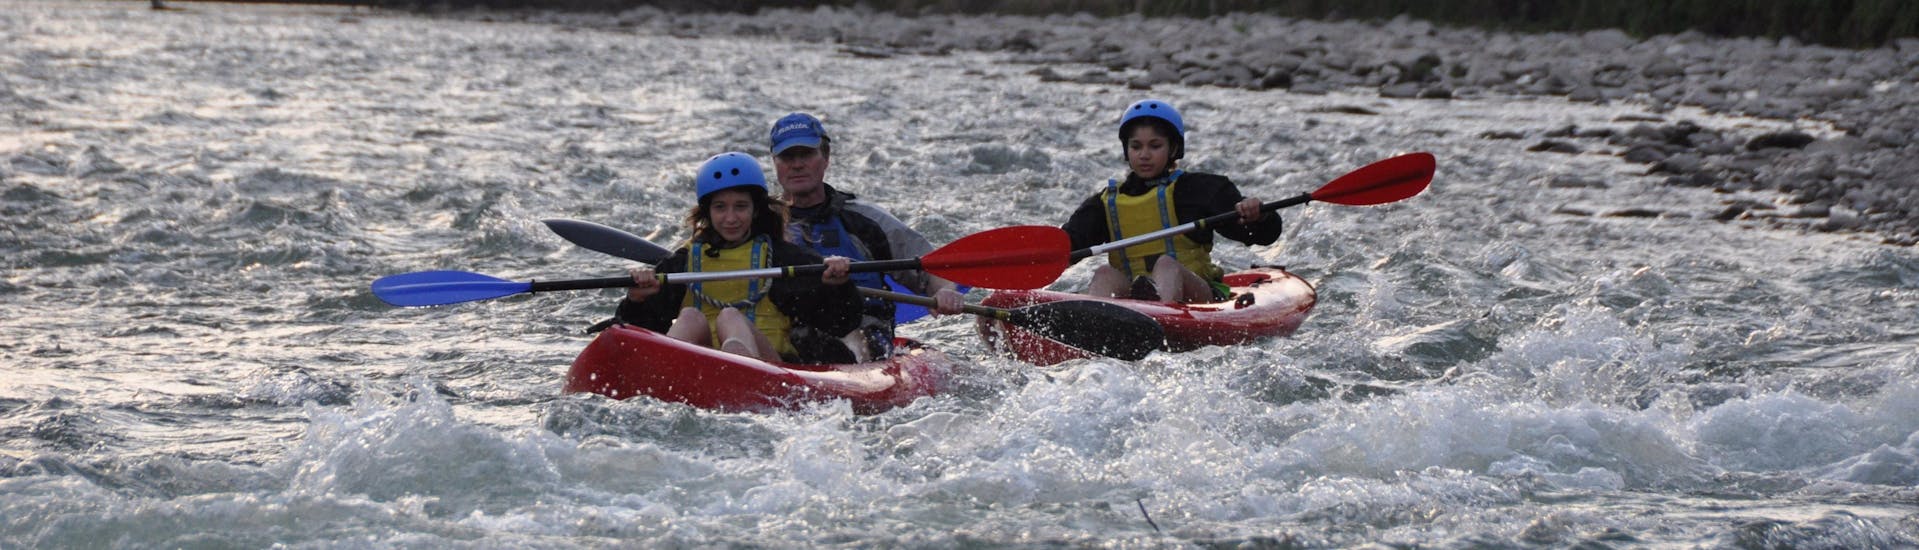 A father and his two children are paddling intensely during the Kayak on the Adige River in the Terra dei Forti with Pescantina Rafting Bussolengo.